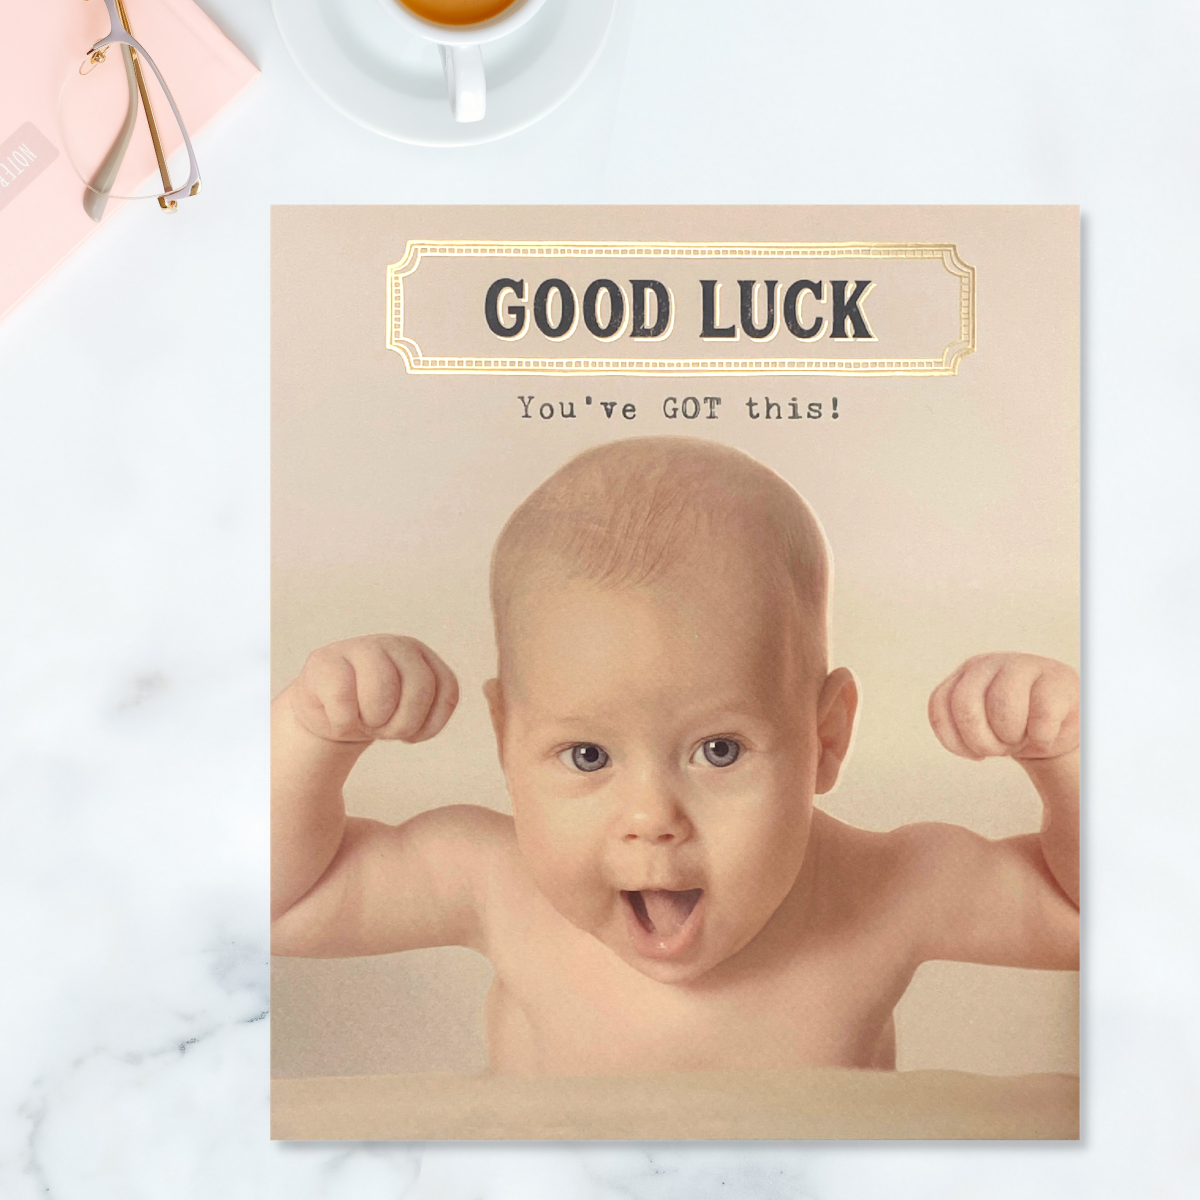 Good Luck Card- Funny Works You've Got This!